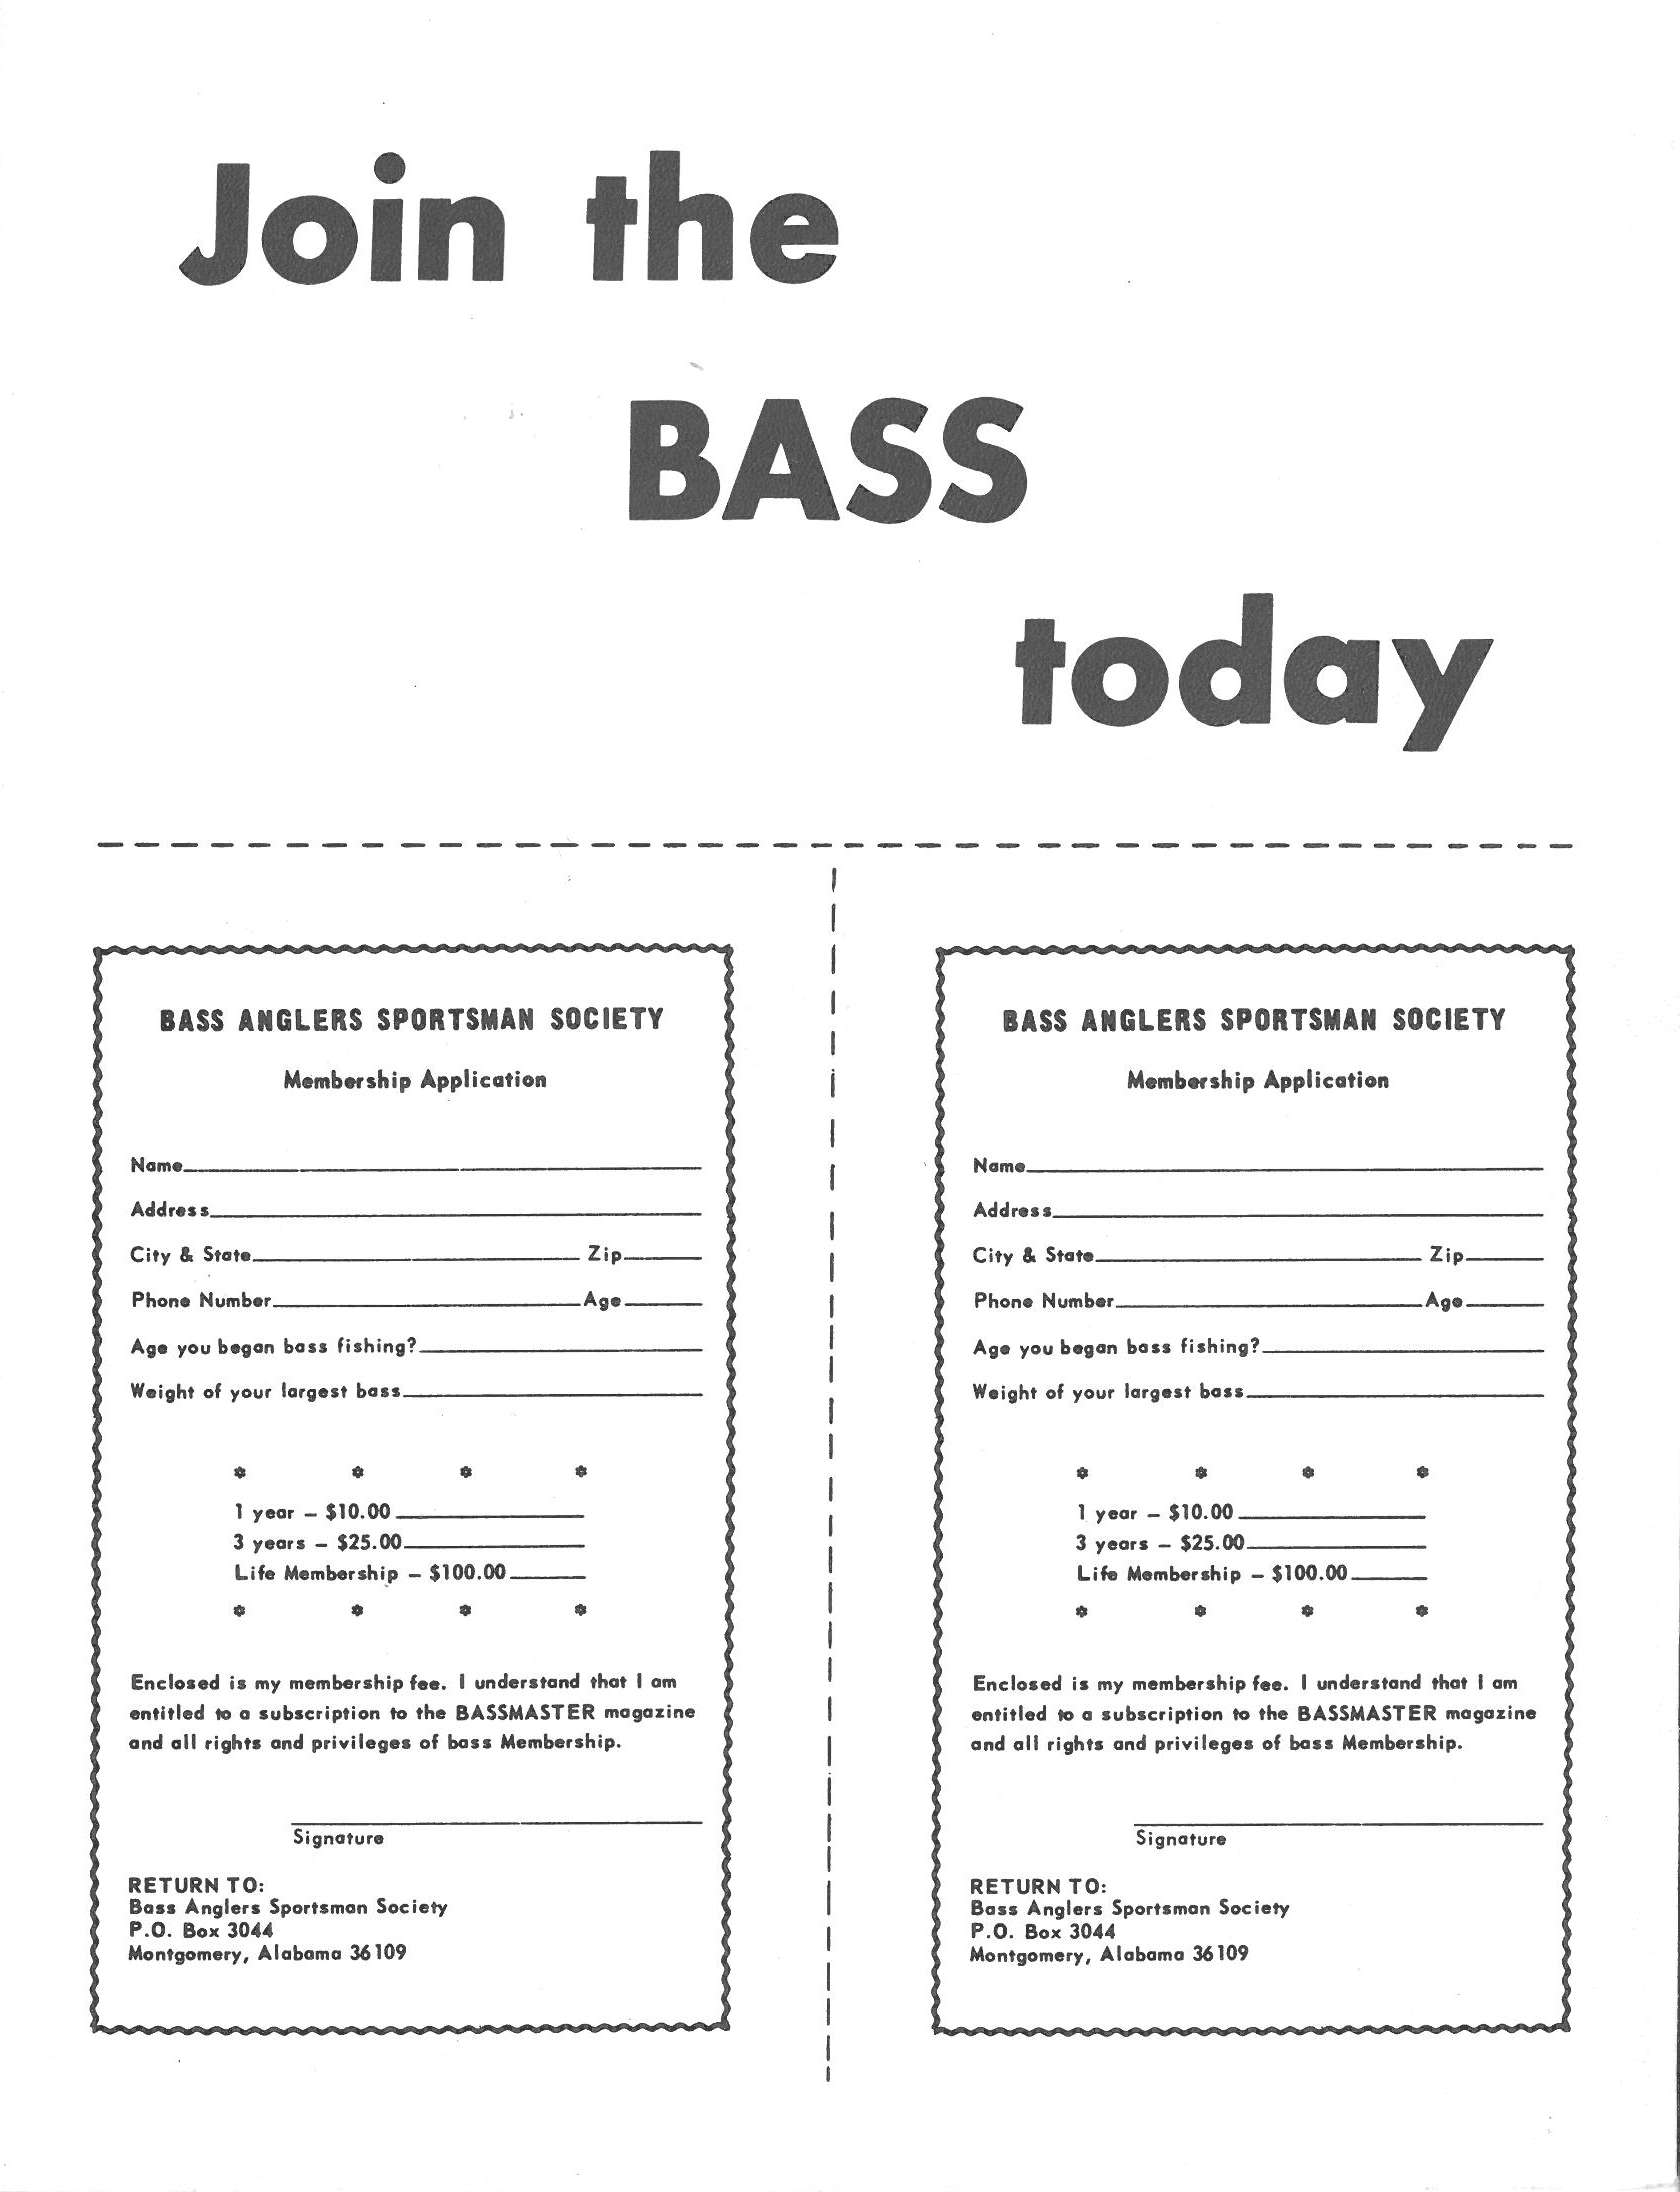 Early B.A.S.S. membership applications appear on the back cover.